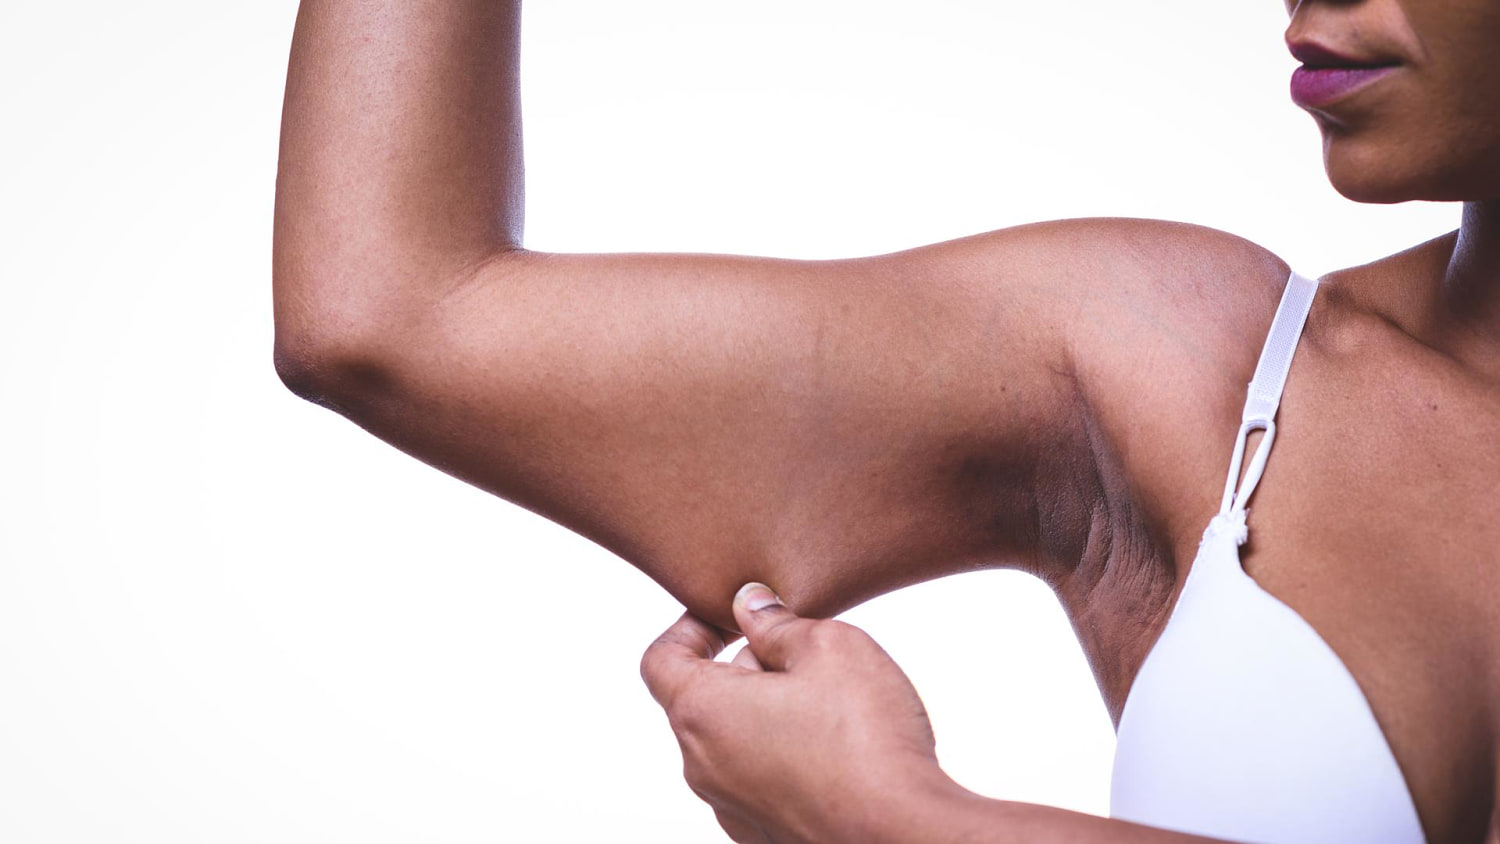 How can I tone up my flabby arms?